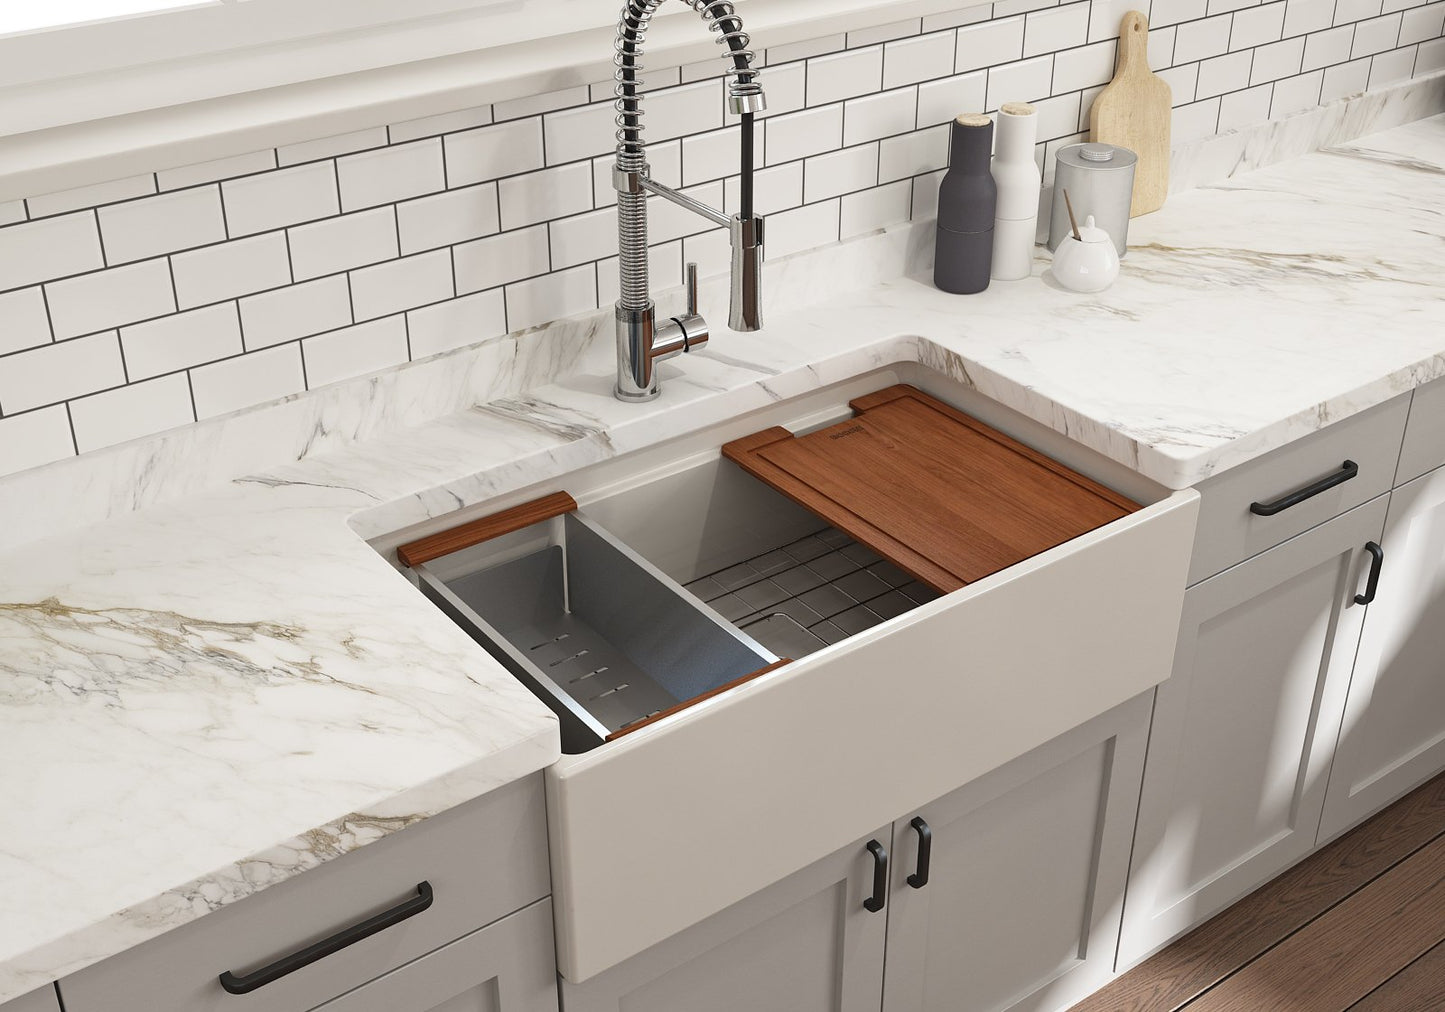 Bocchi Farmhouse Apron Front Fireclay 33" Single Bowl Kitchen Sink with Step Rim (Call for special pricing)